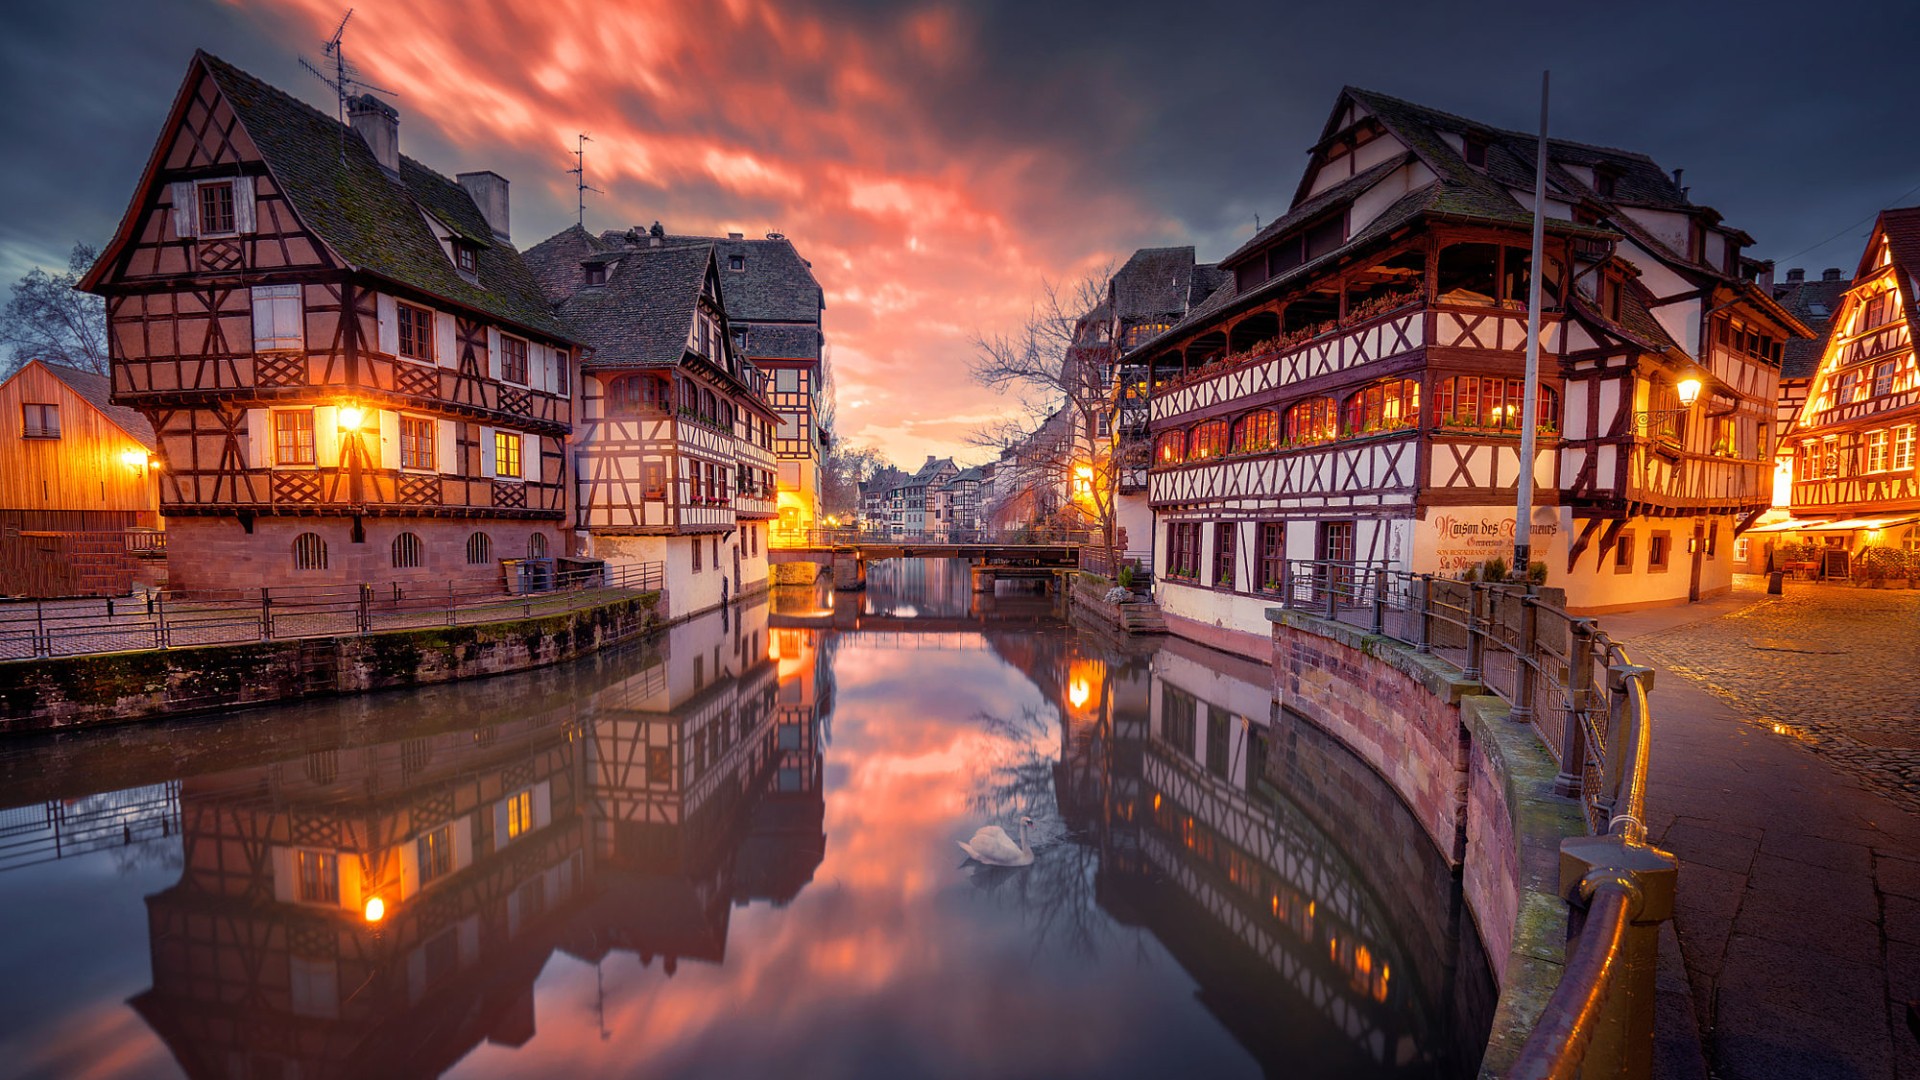 architecture, Building, City, Cityscape, Strasbourg, France, Old building, House, Lights, Sunset, Clouds, Evening, Reflection, River, Street, Bridge Wallpaper